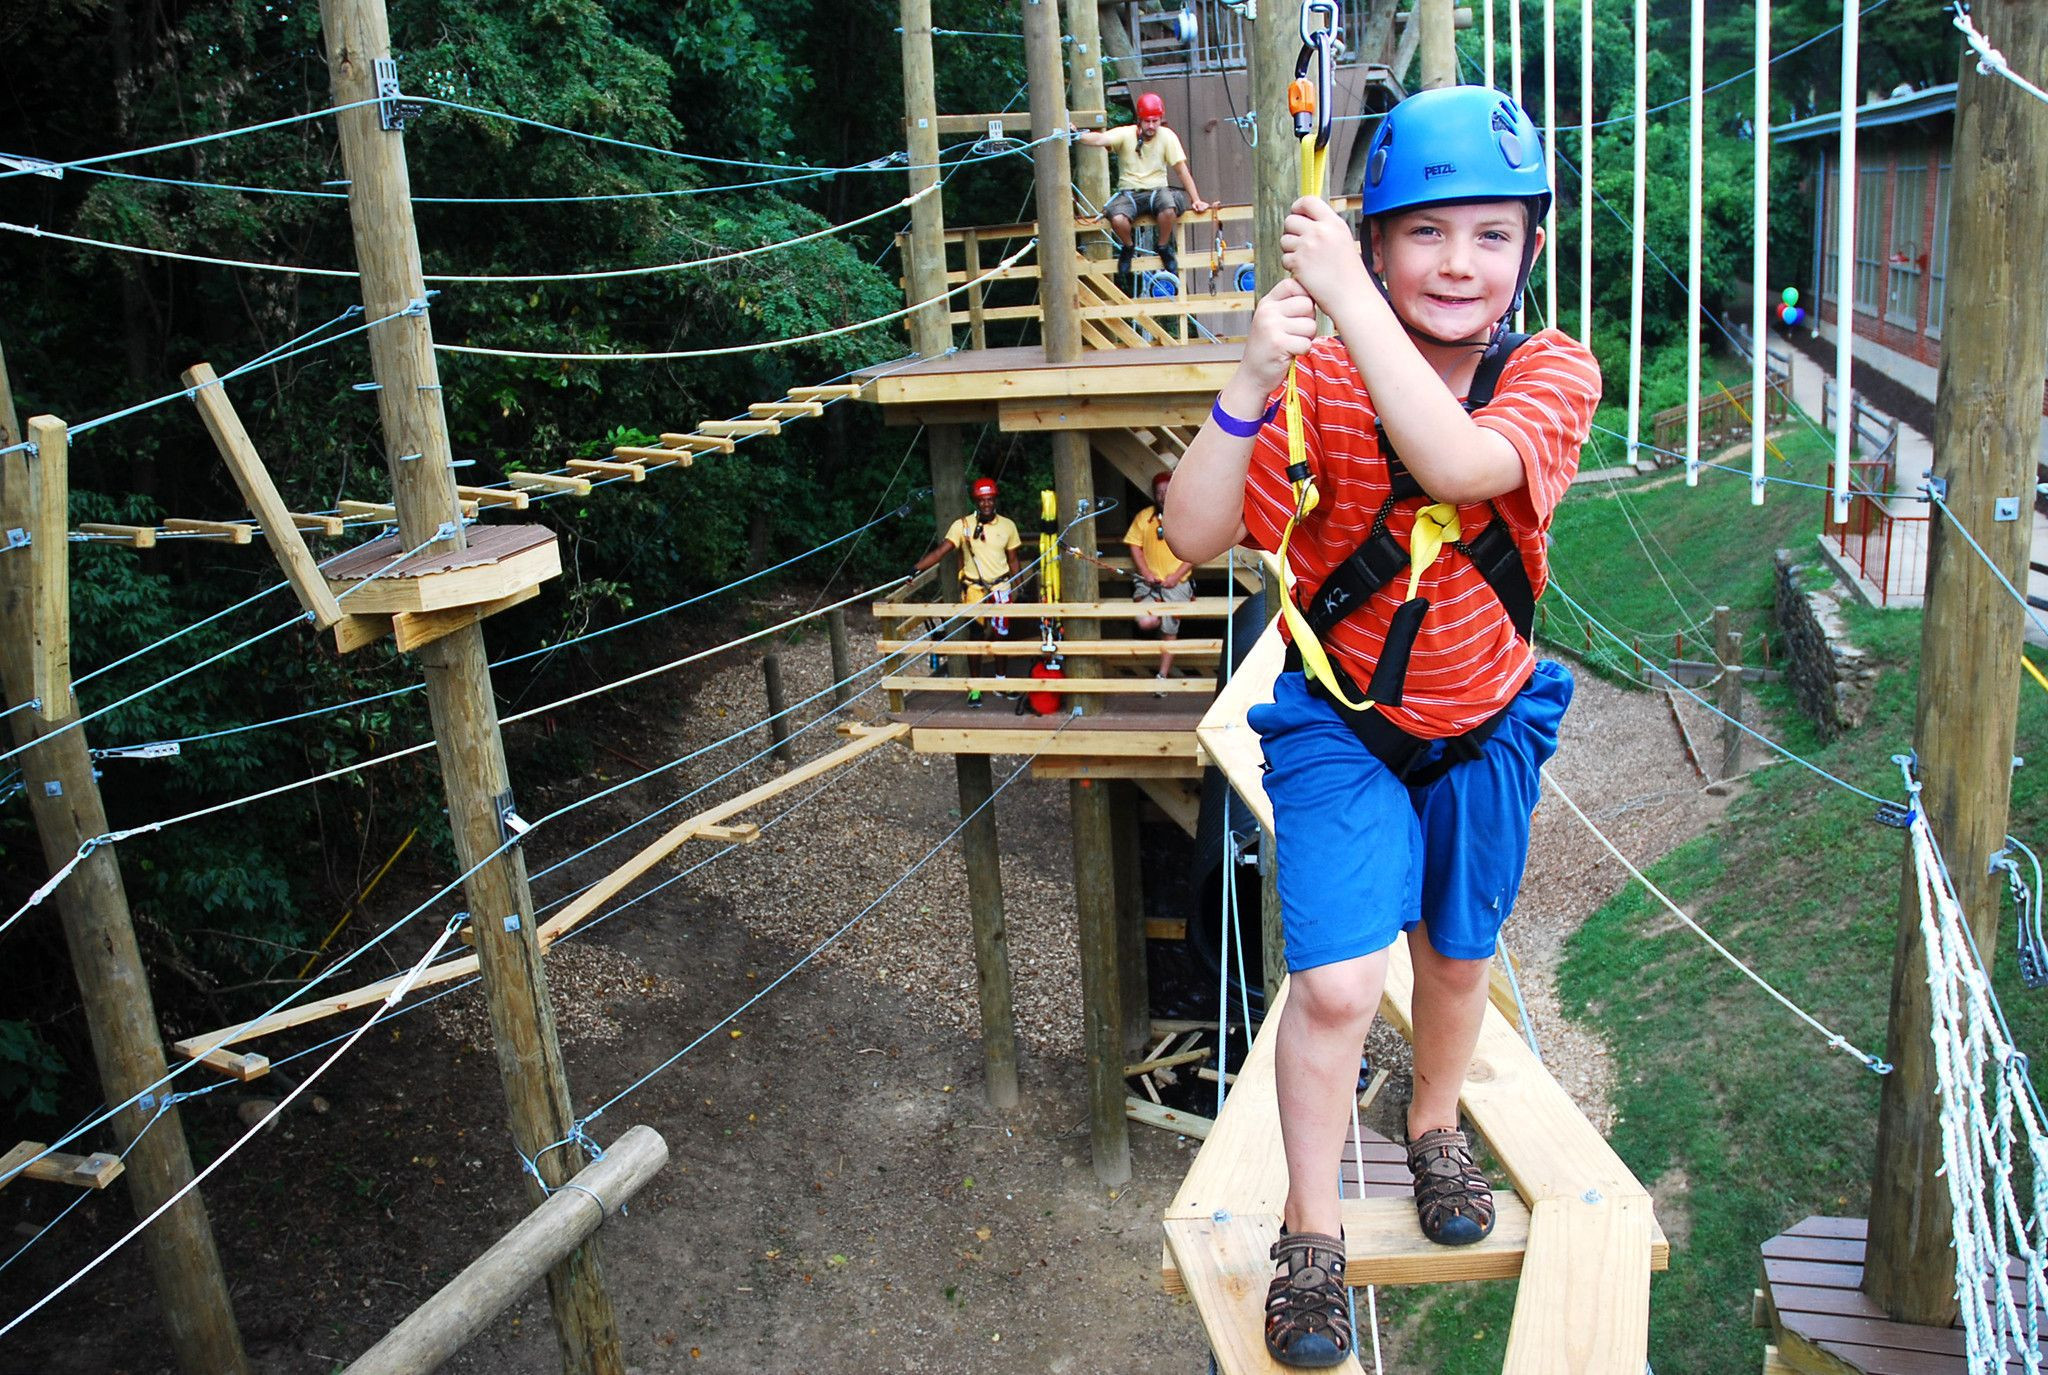 Summer Activities Near Me
 100 best places to take the kids